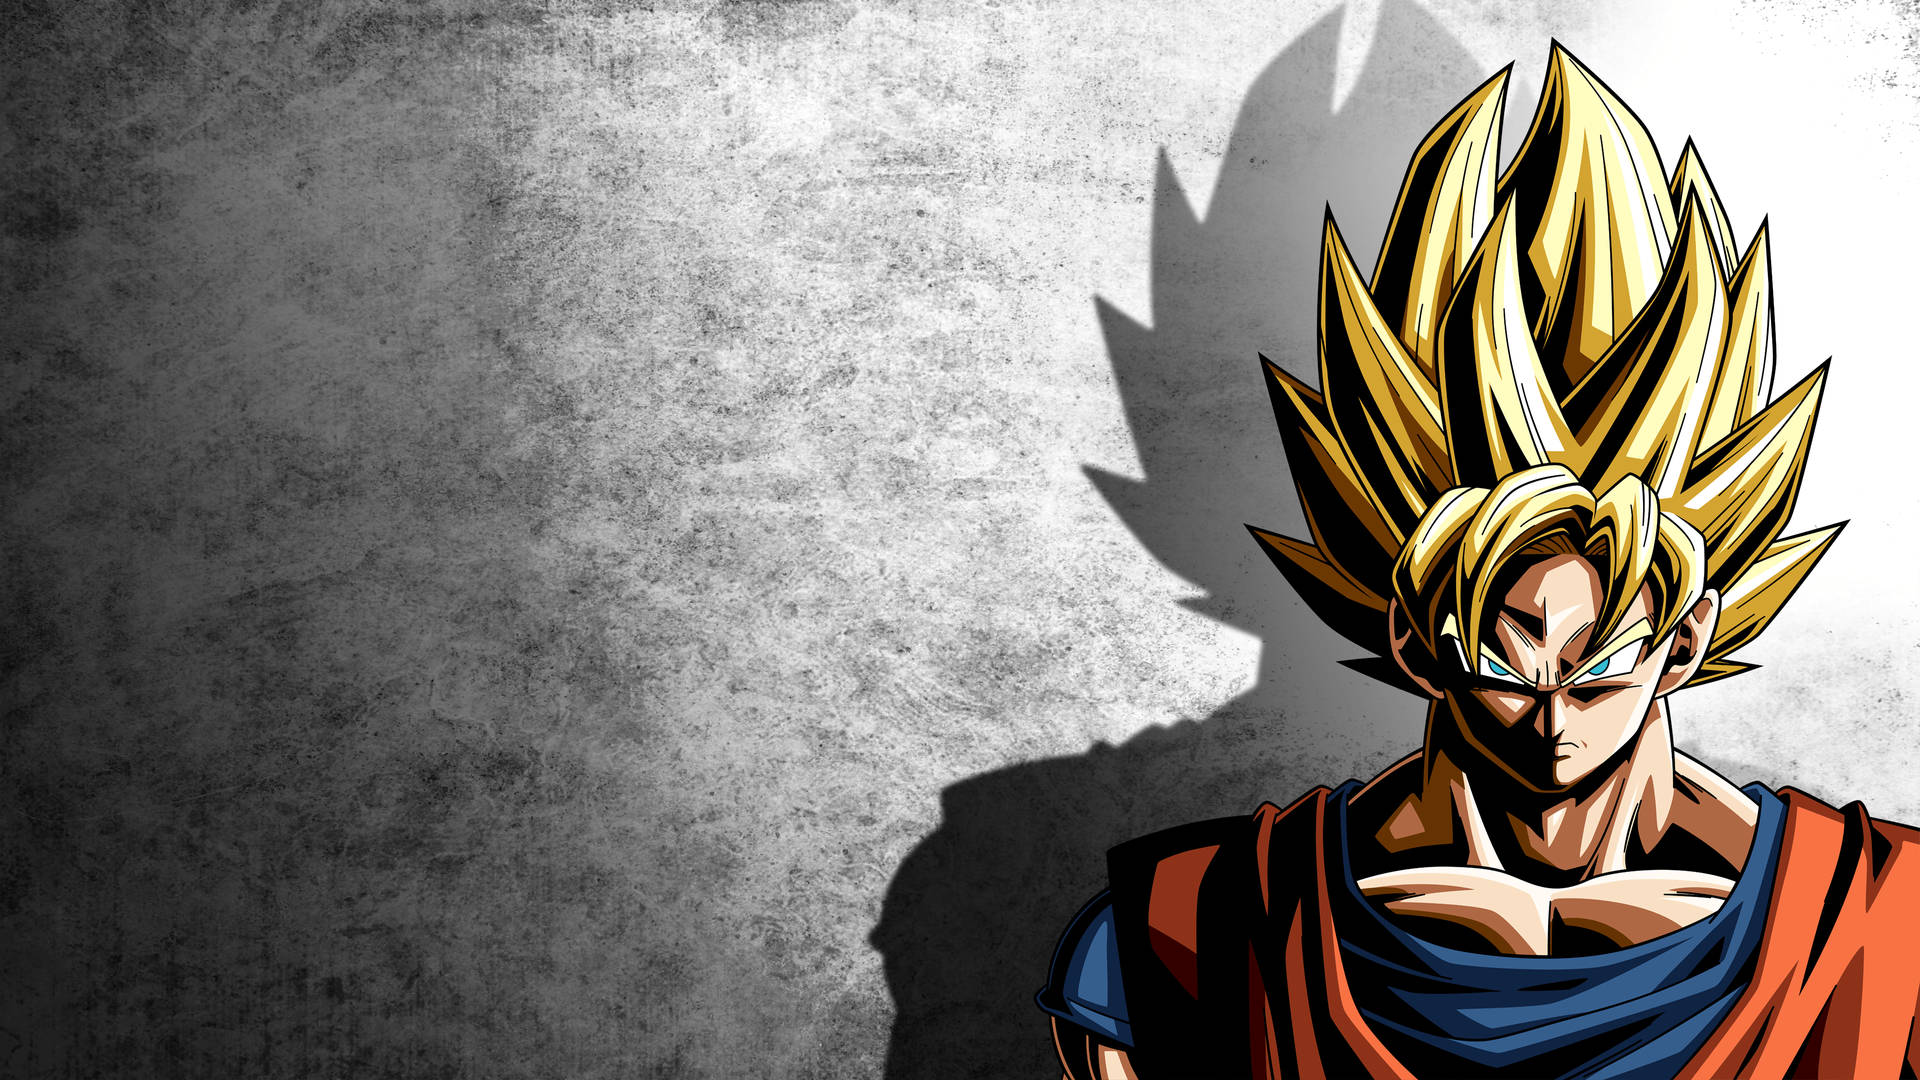 Goku is ready to fight in Dragon Ball Super and show off his power Wallpaper